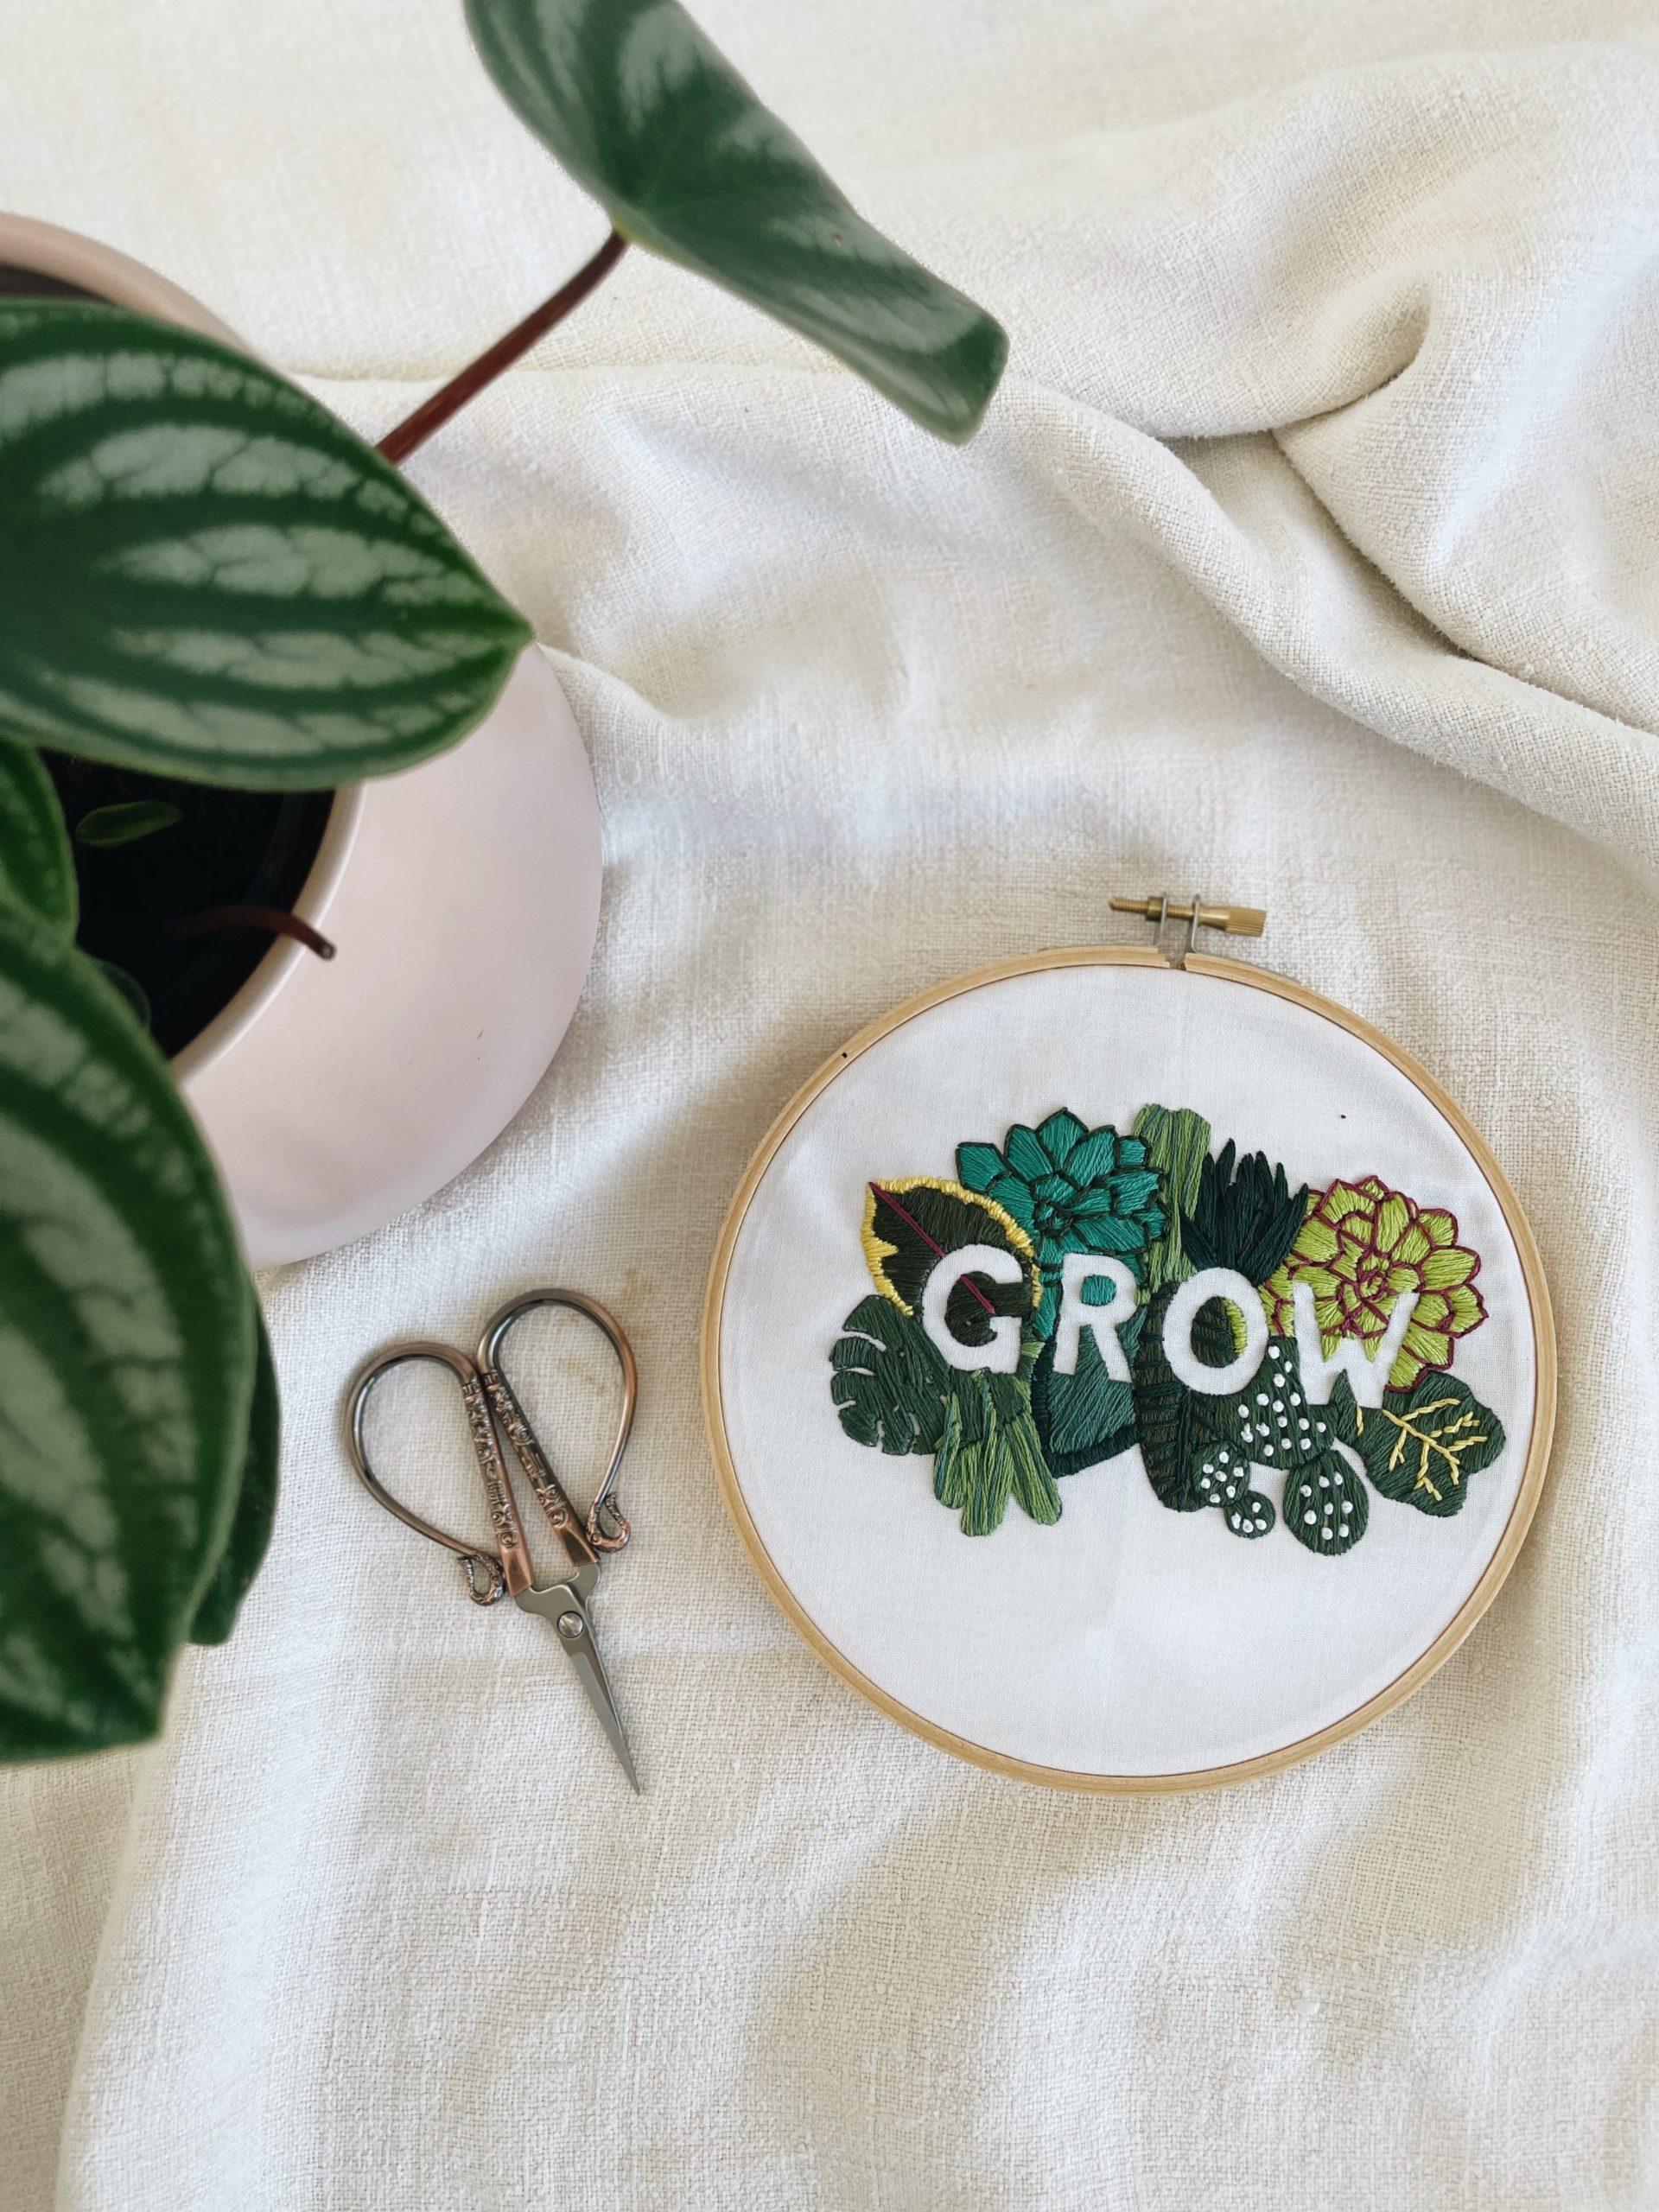 GROW Embroidery with scissors & plant (pattern by Brynn and Co, embroidary by Helen Steward Curious Handmade)